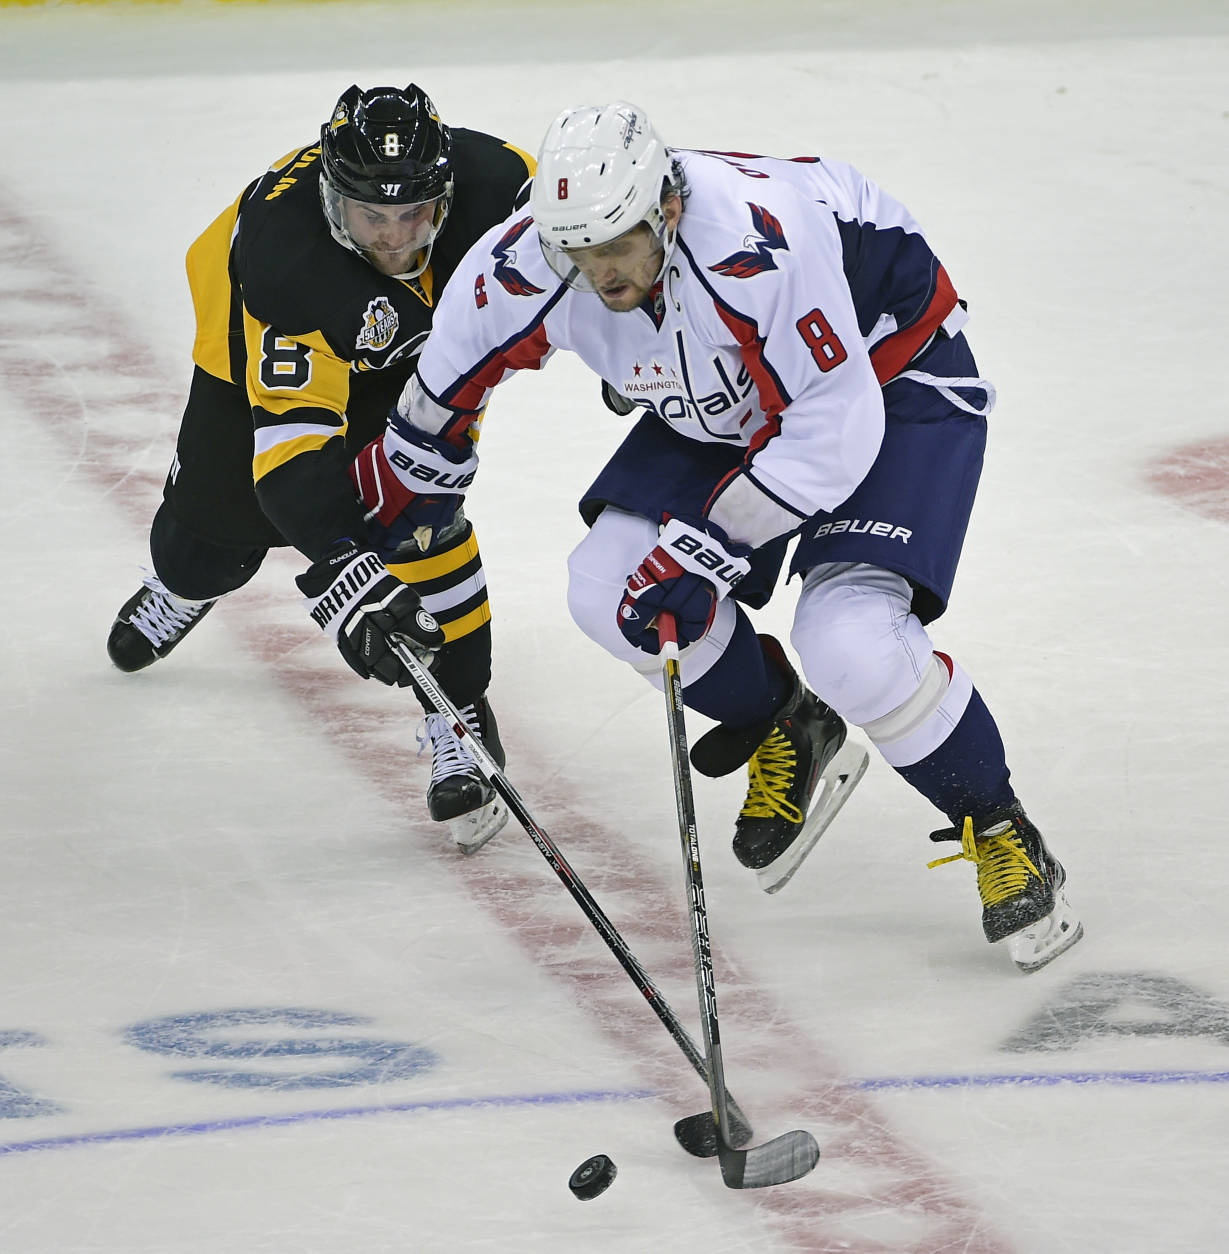 Pittsburgh Penguins defenseman Brian Dumoulin, left, and Washington Capitals left wing Alex Ovechkin (8) reach for the puck during the third period of an NHL hockey game Thursday, Oct. 13, 2016, in Pittsburgh. (AP Photo/Fred Vuich)